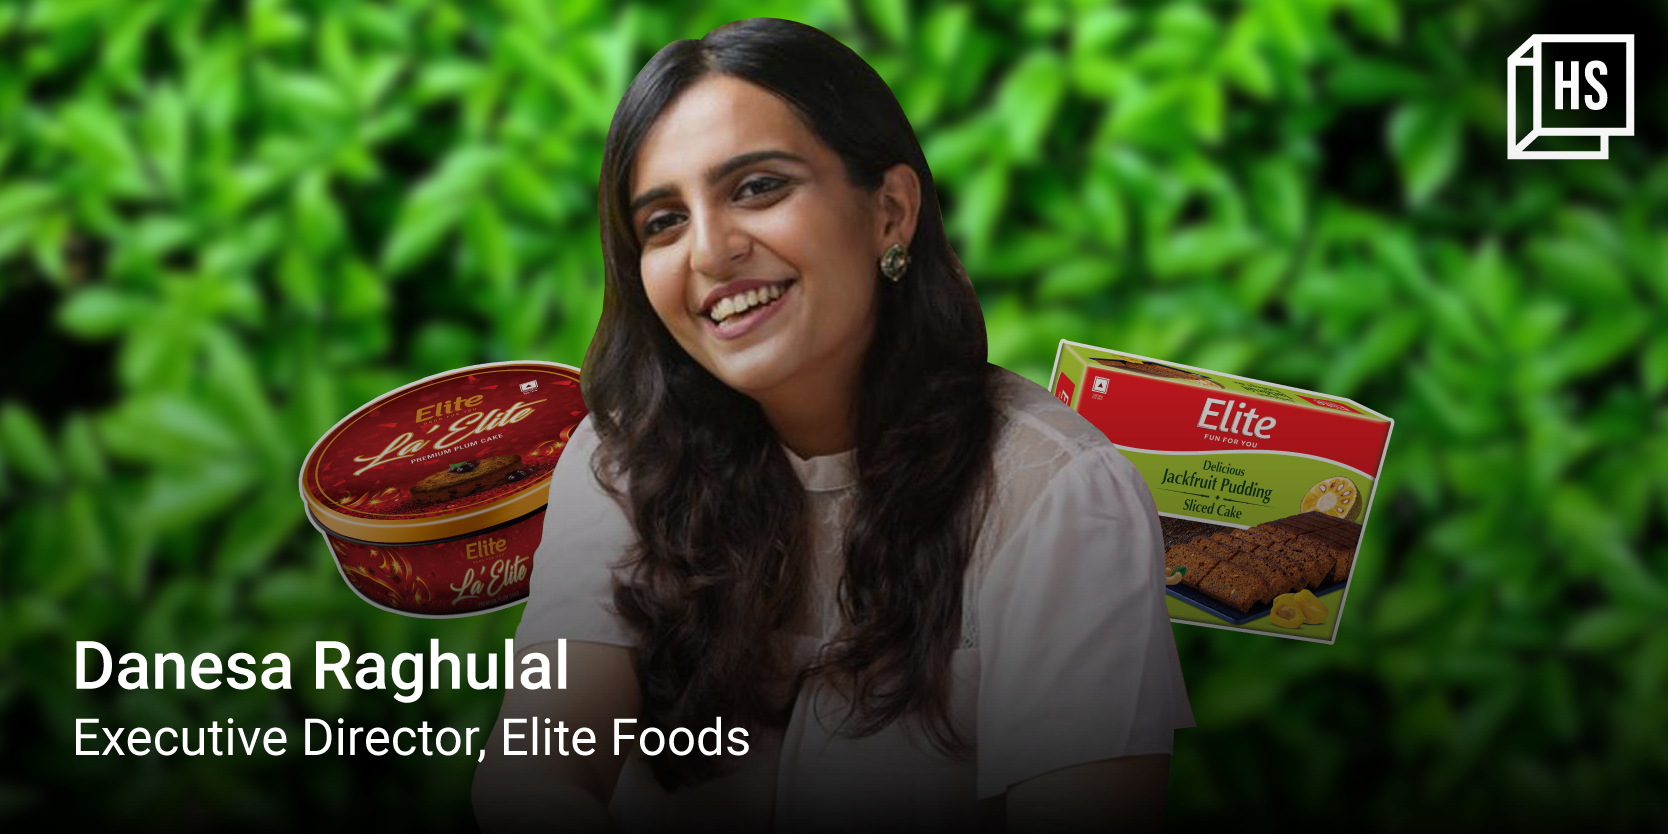 How Danesa Raghulal is leading Elite Foods towards innovation, newer markets 

